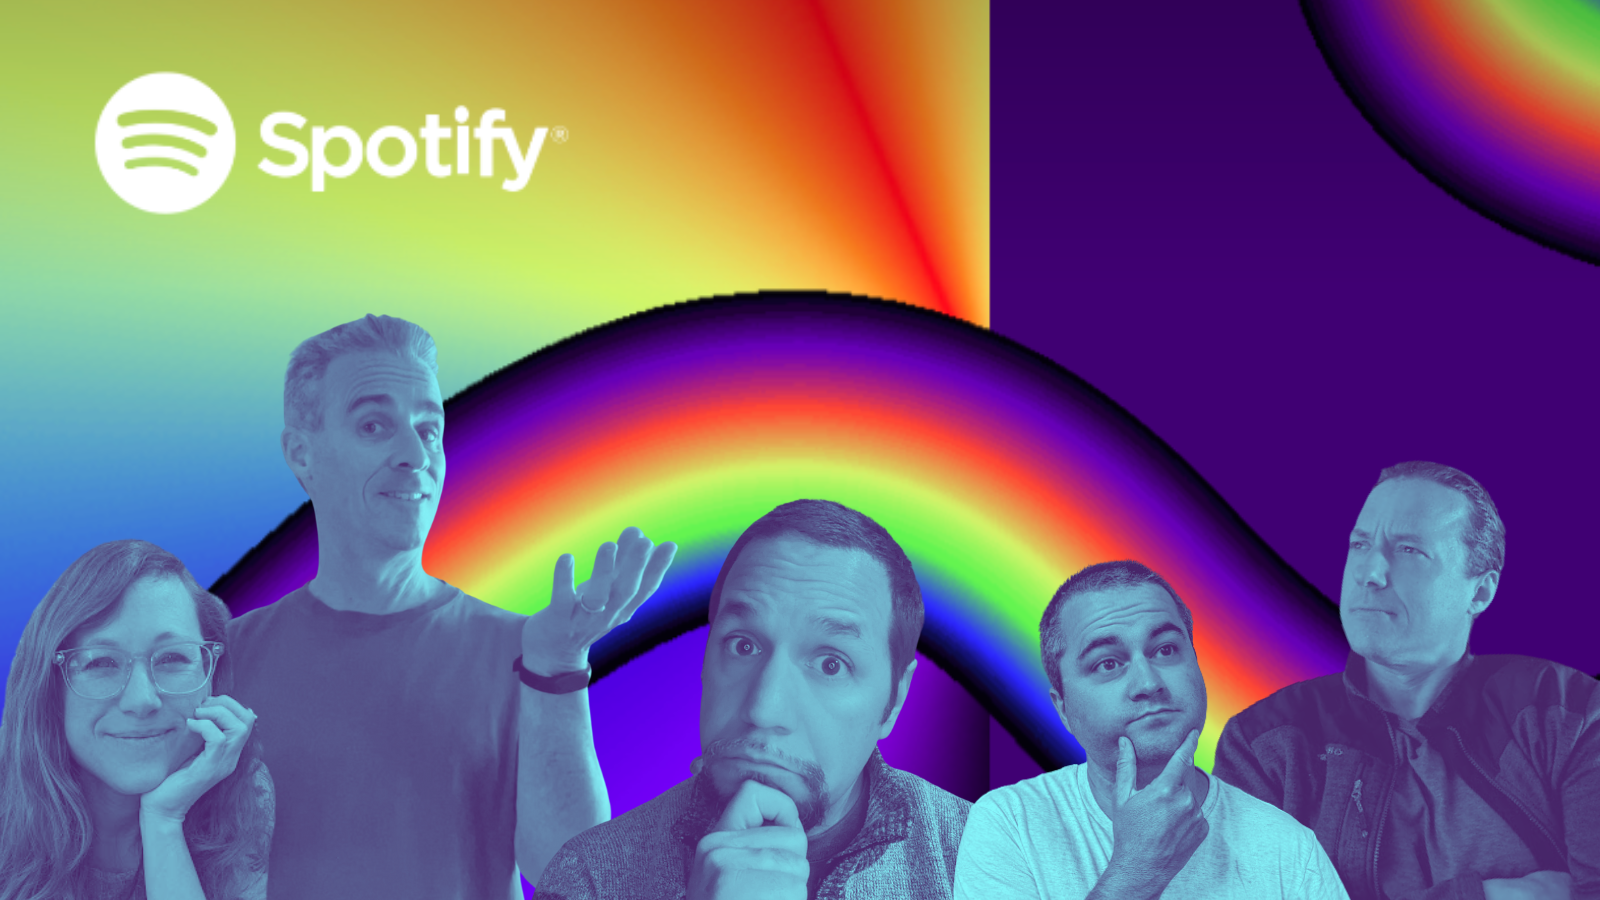 Spotify Contest